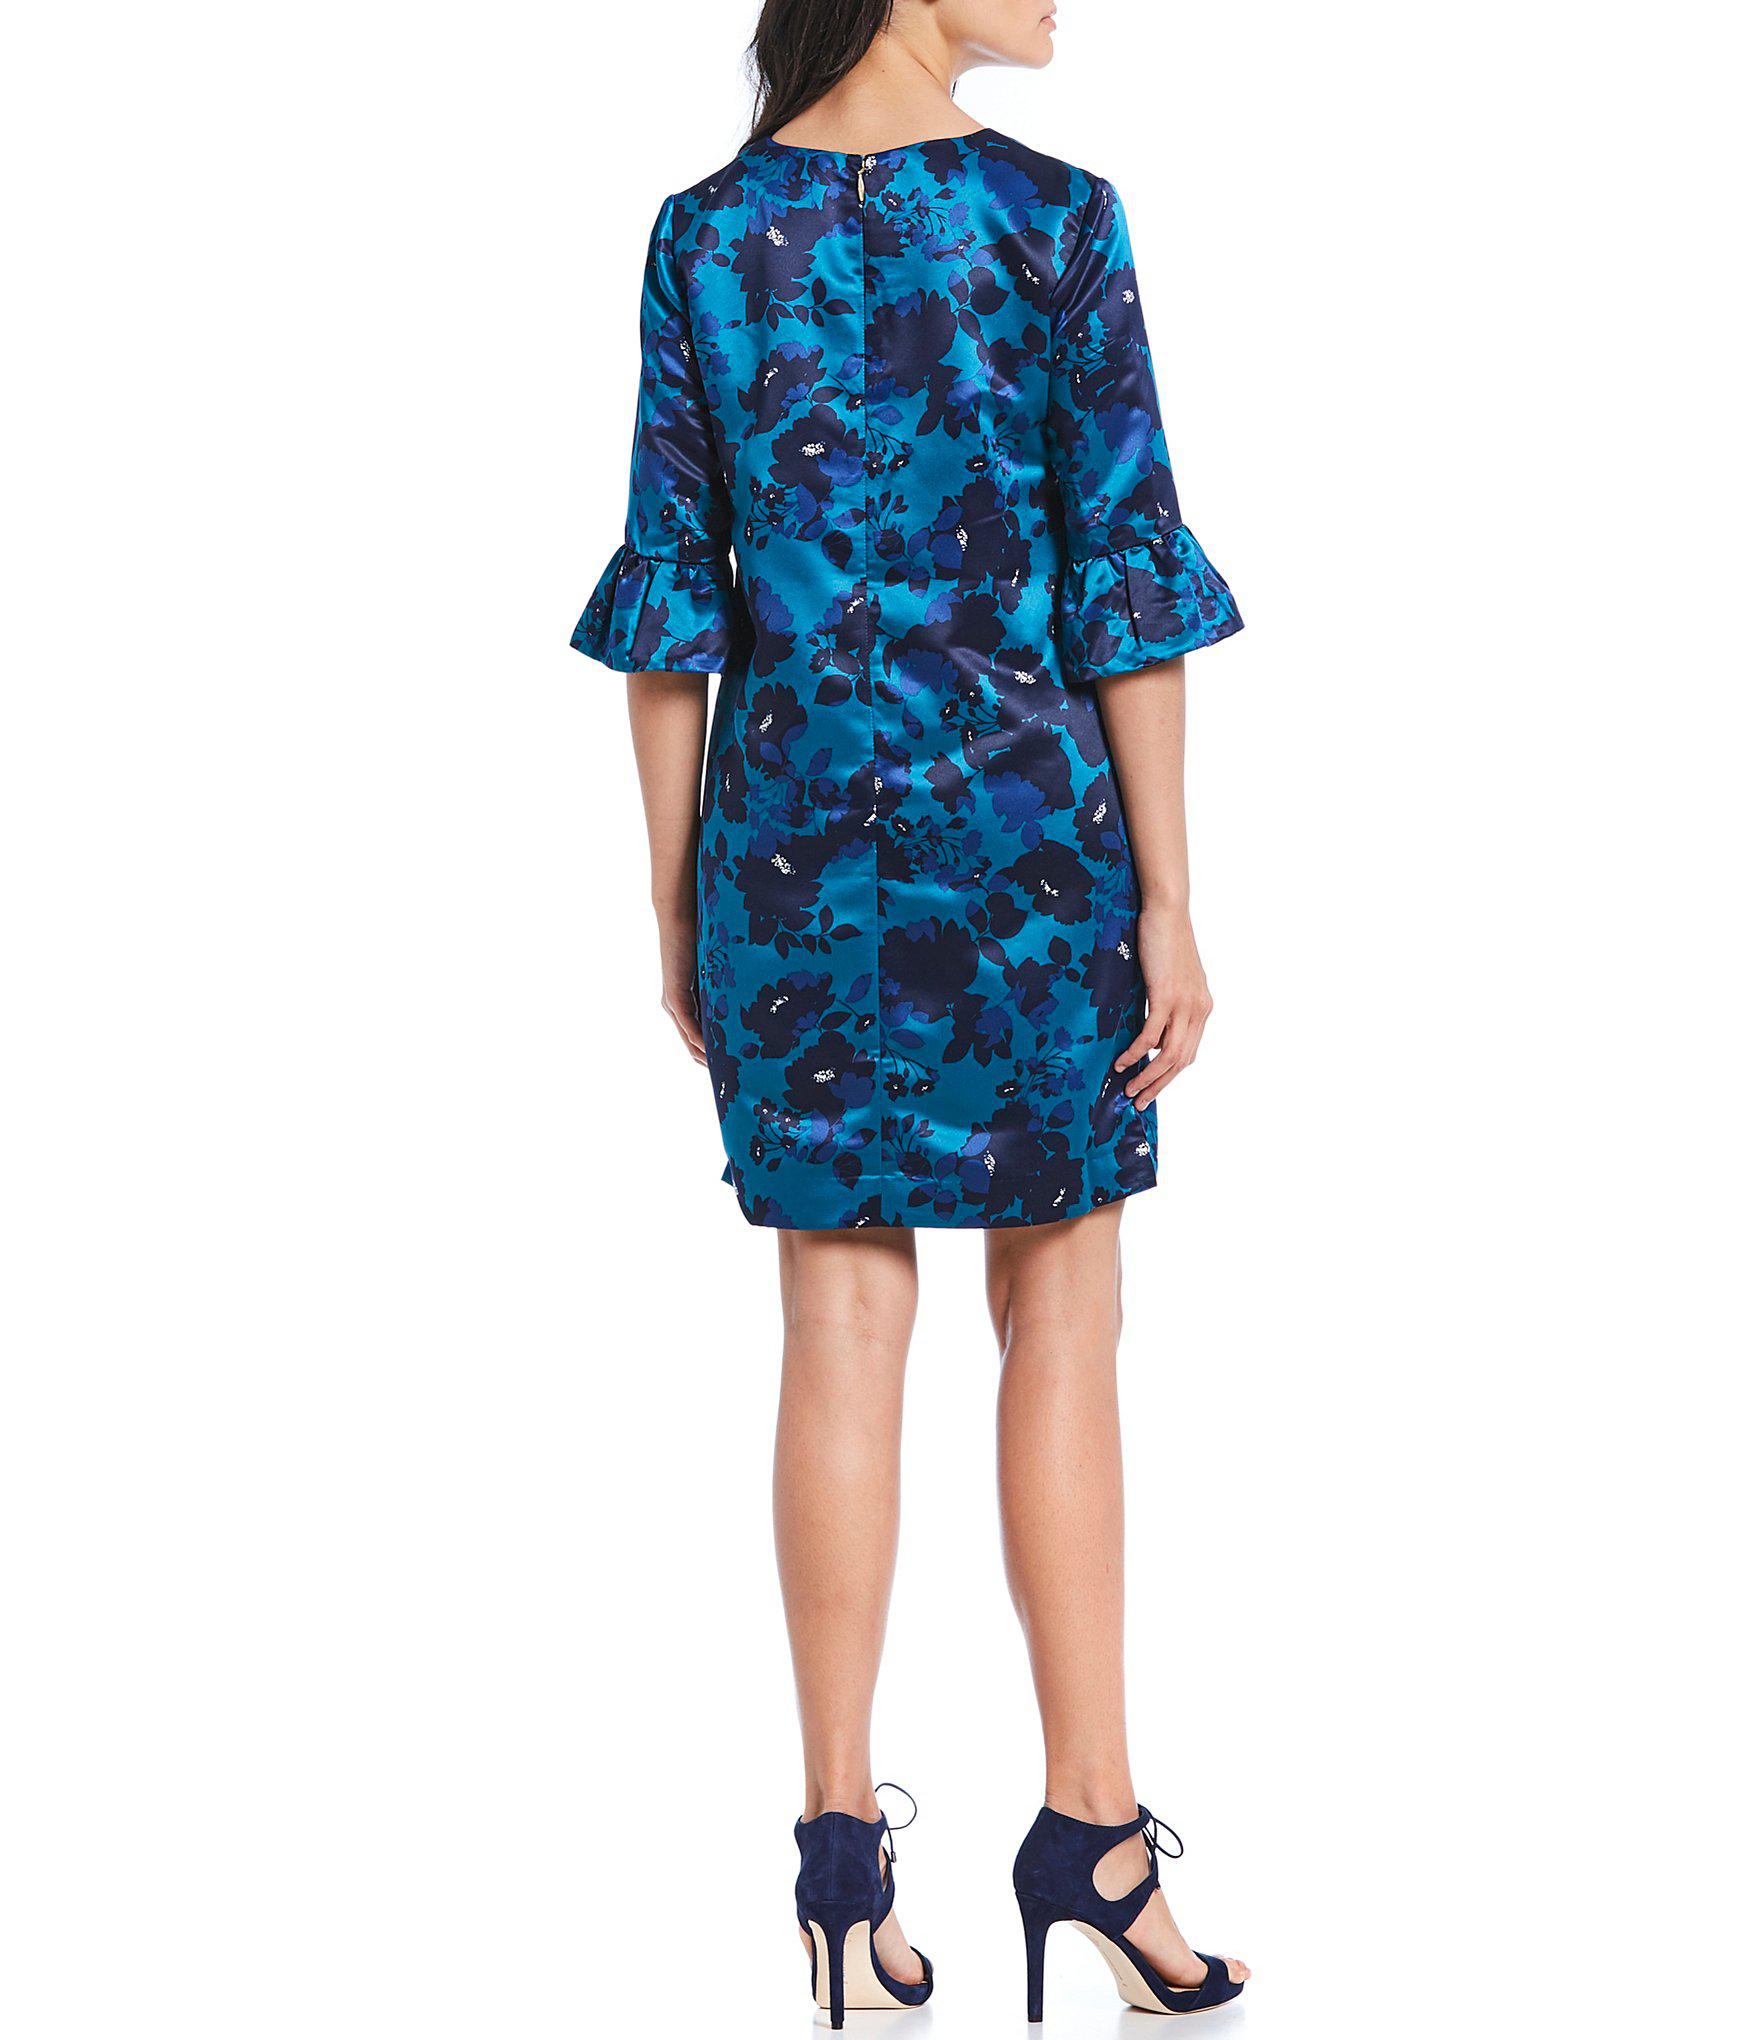 Lyst - Draper James Floral Print Bell Sleeve A-line Dress in Blue